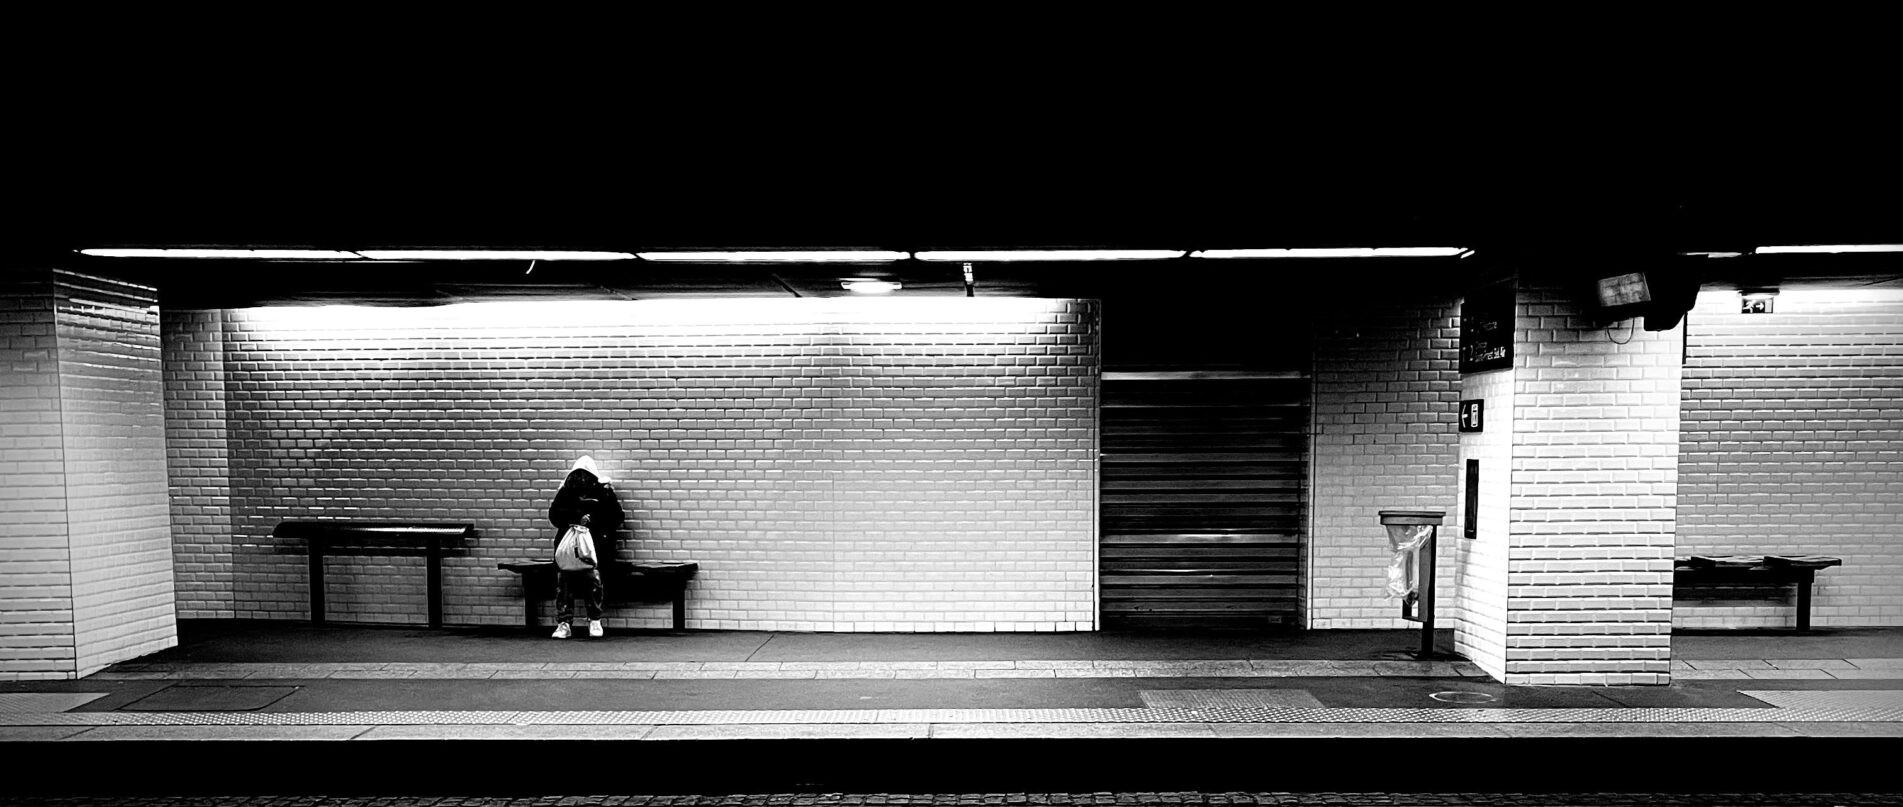 person sitting on a bench waiting for a train